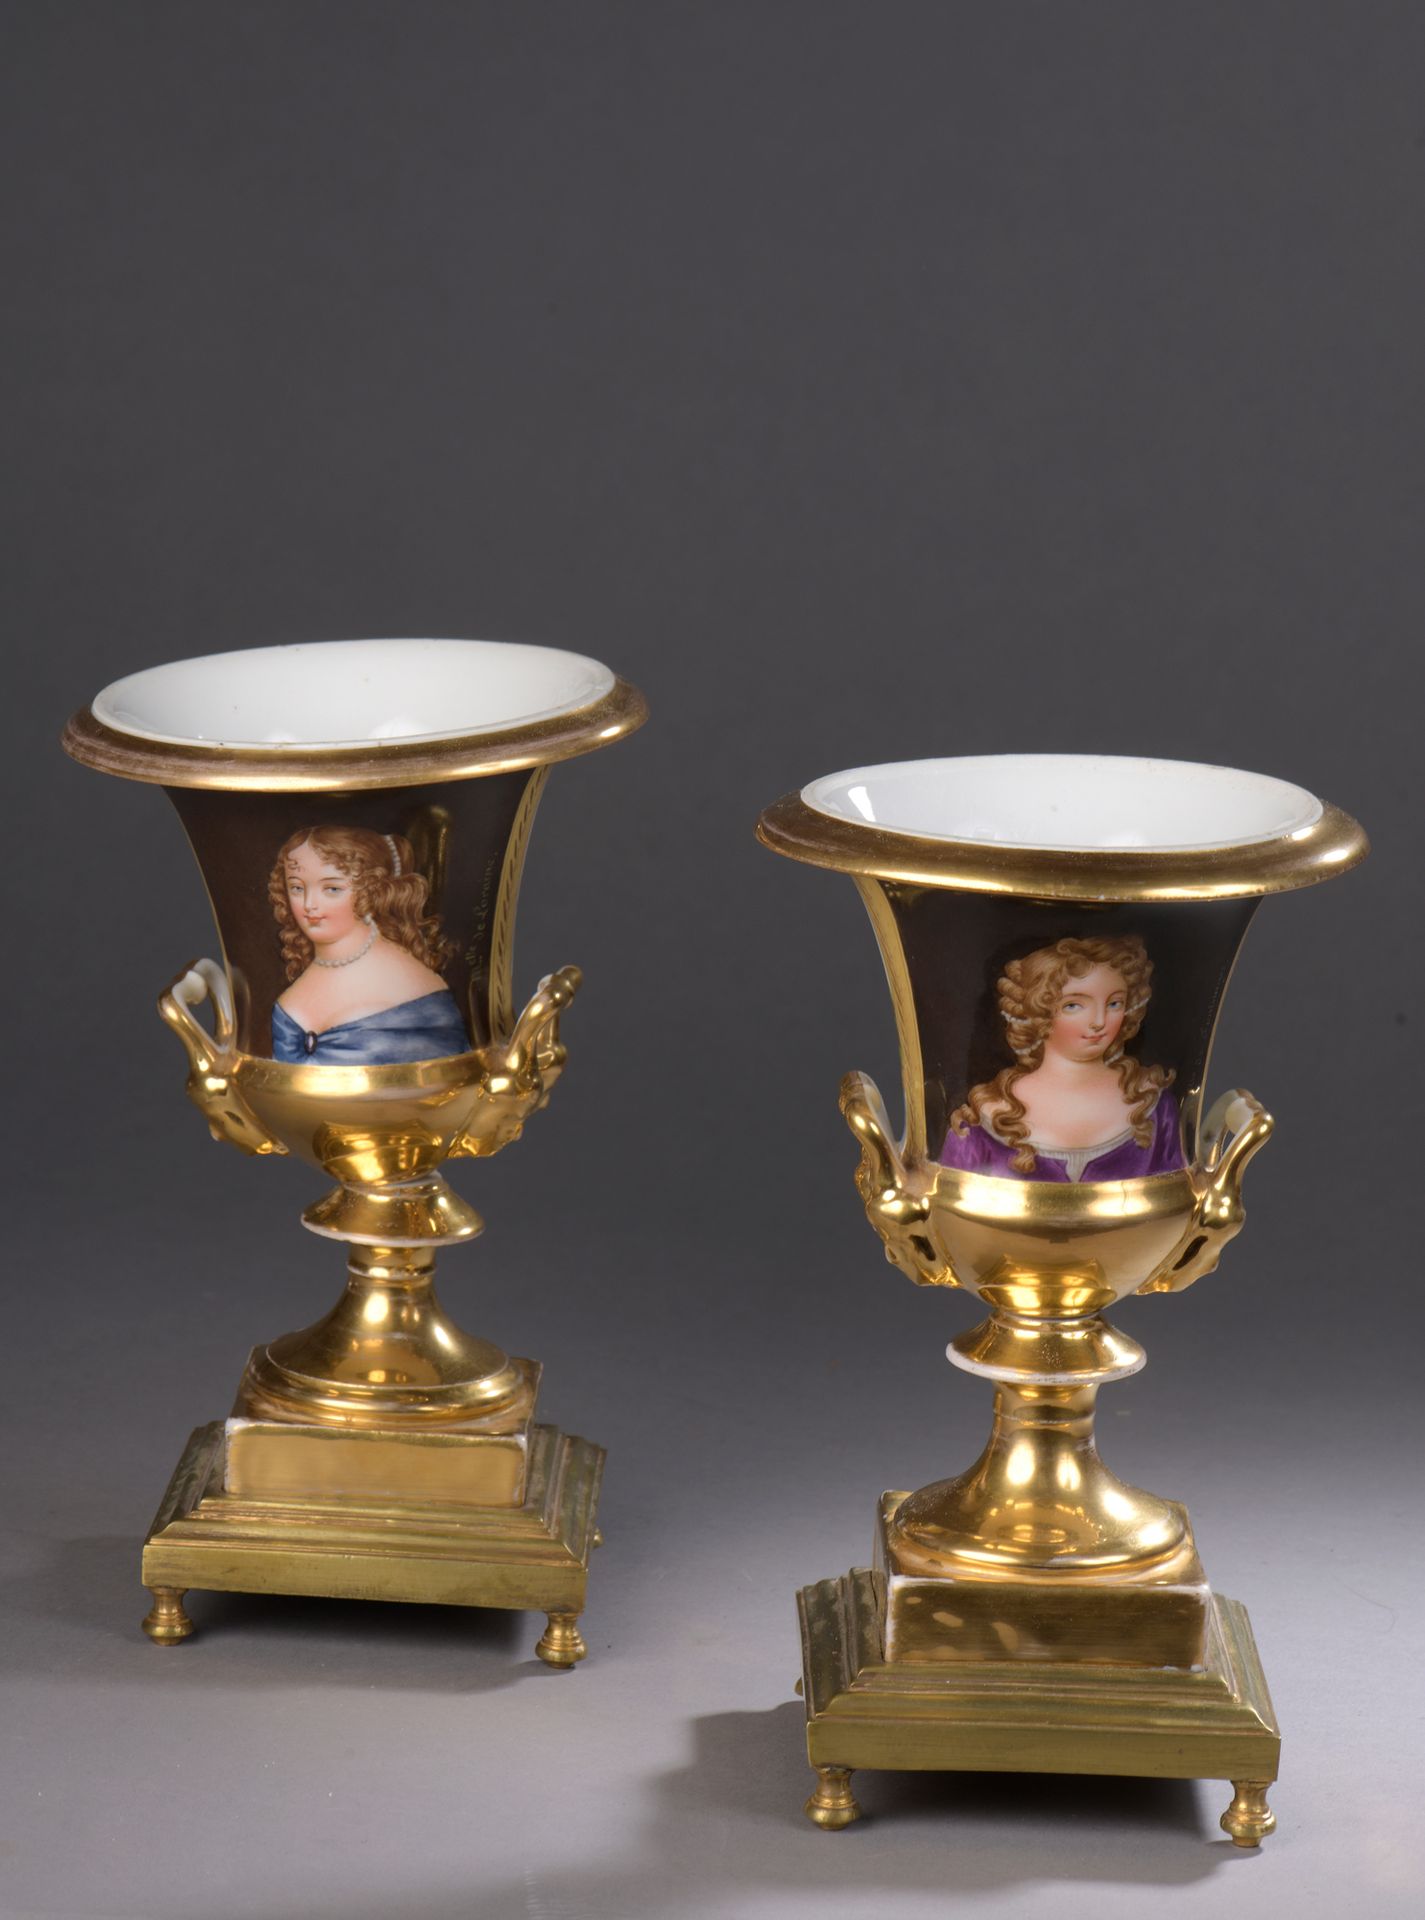 Null PARIS

Pair of Medici vases with polychrome decoration in two gold reserves&hellip;